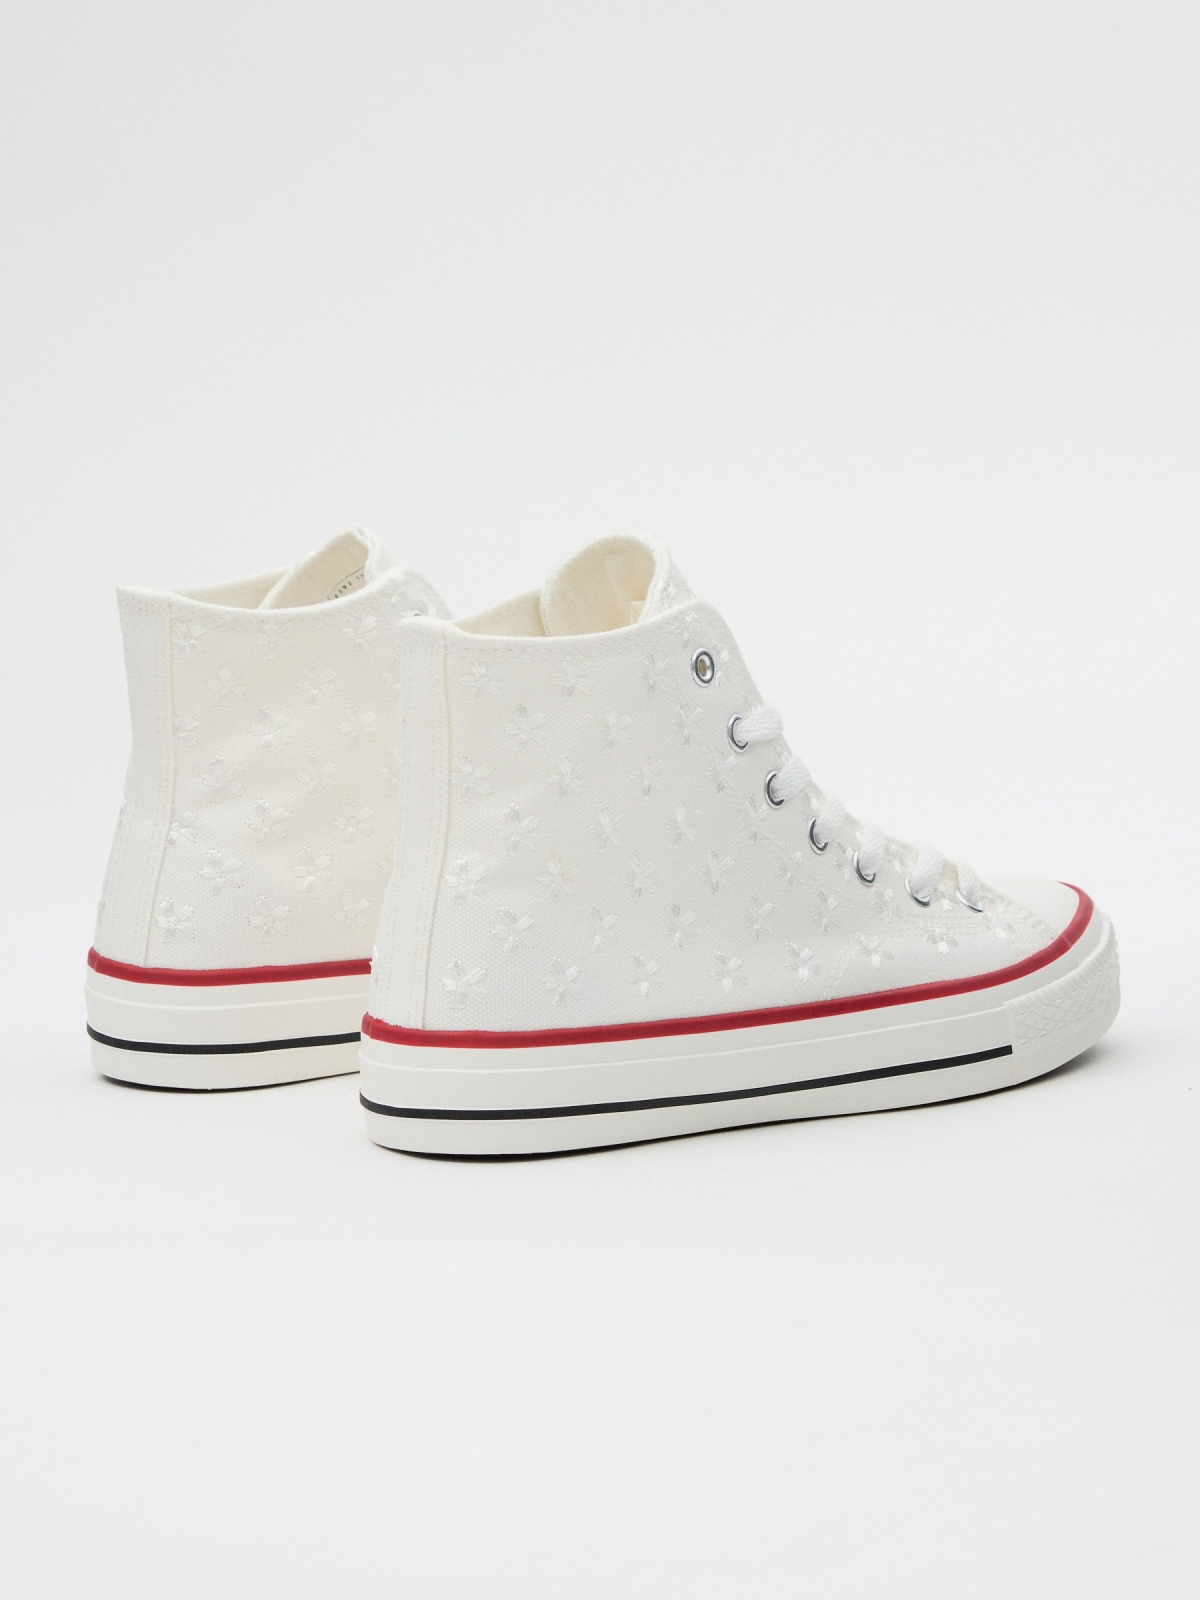 Sneaker casual boot canvas white 45º back view